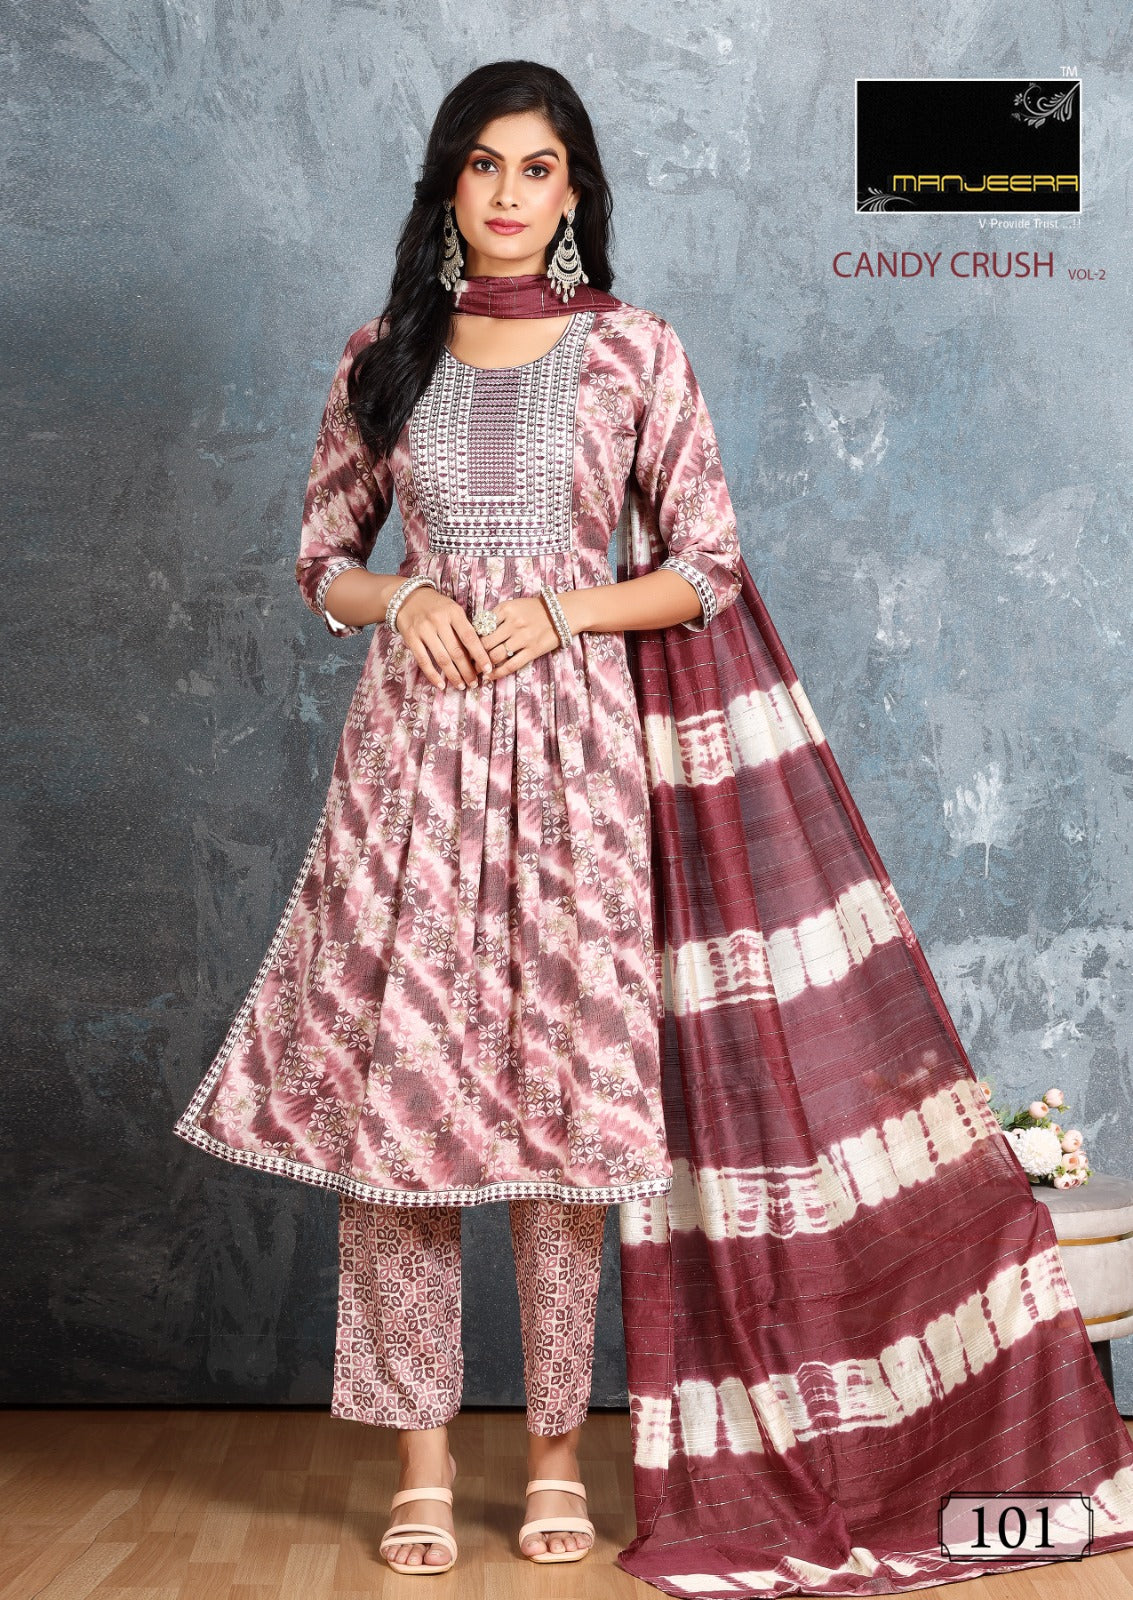 Candy Crush Vol 2 Manjeera Readymade Pant Style Suits